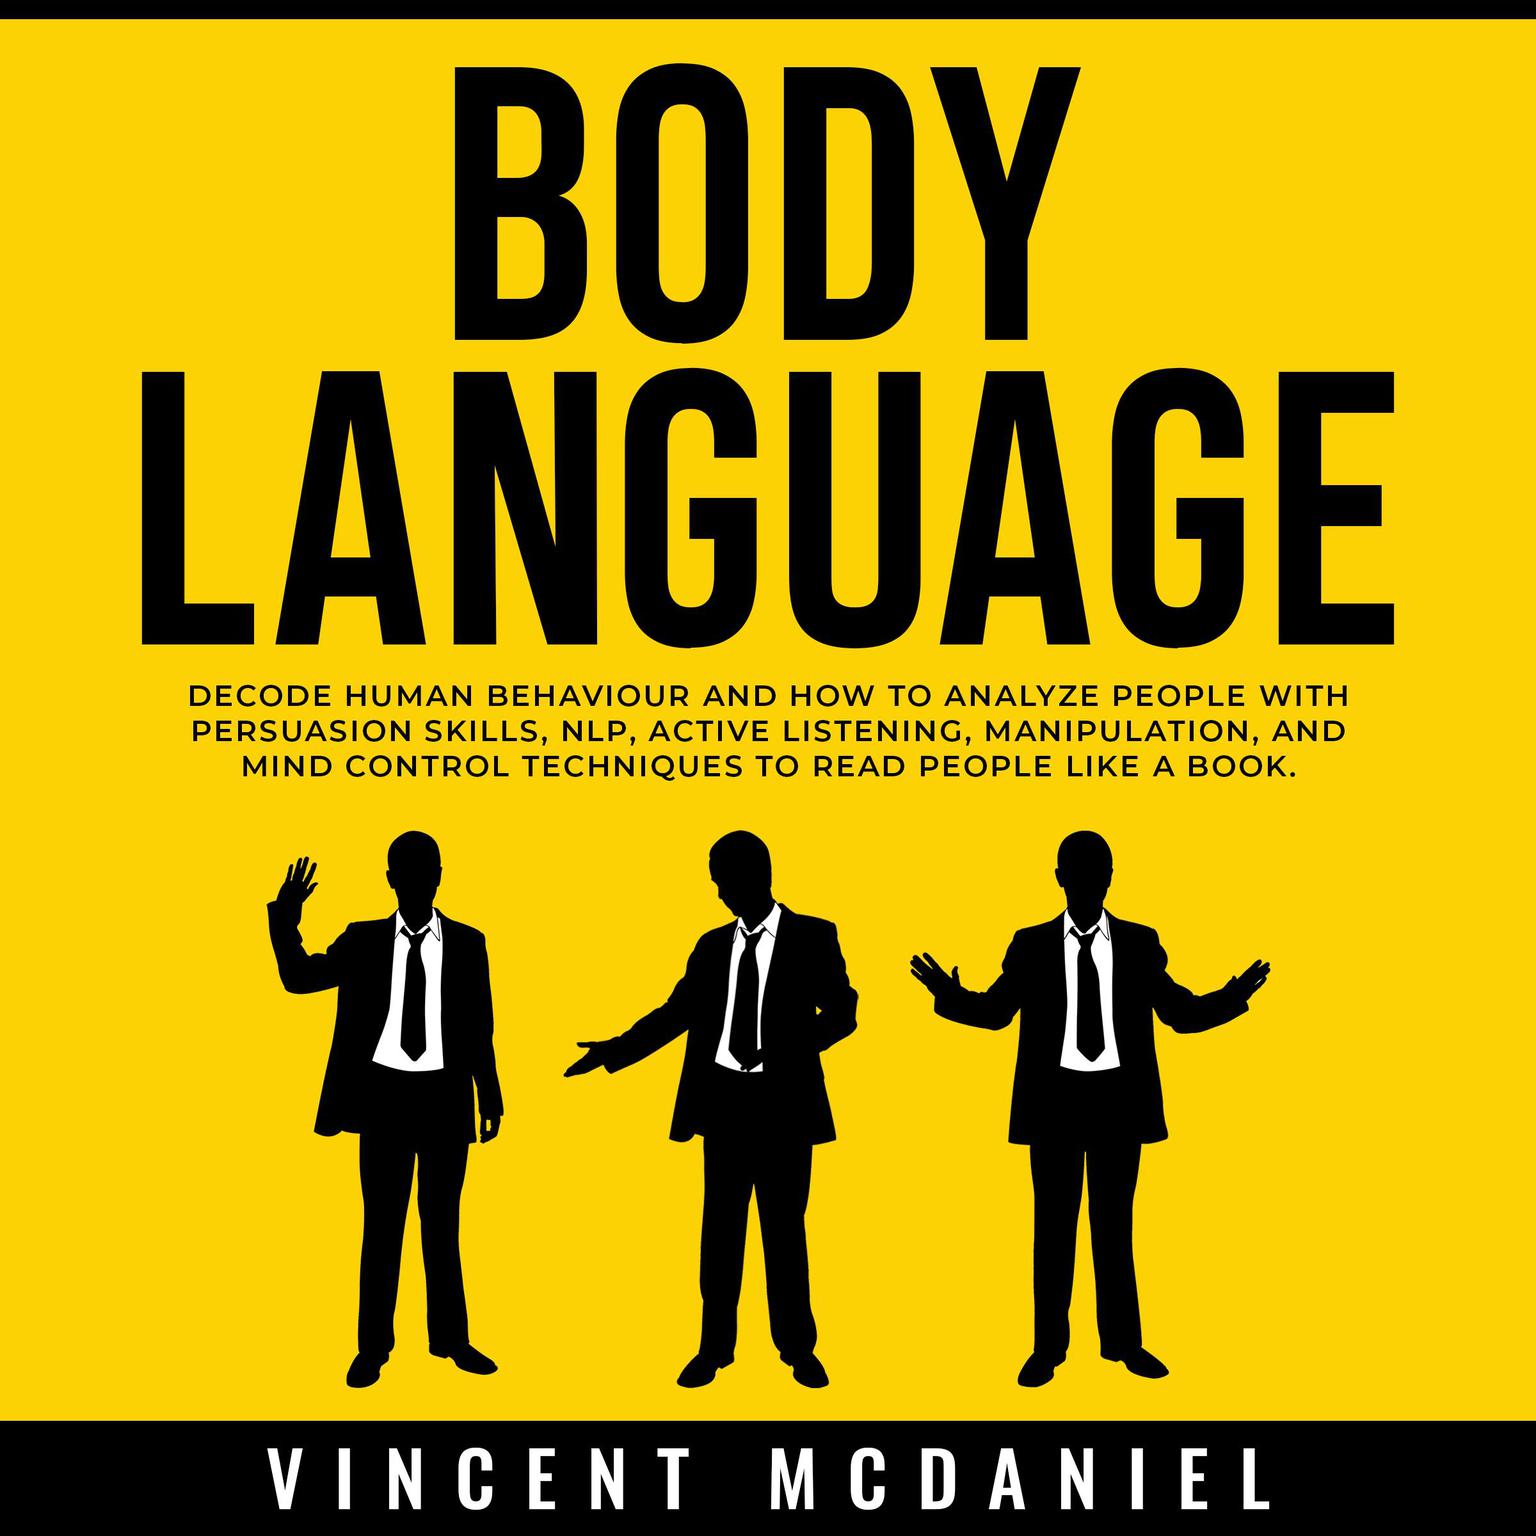 Body Language: Decode Human Behaviour and How to Analyze People with Persuasion Skills, NLP, Active Listening, Manipulation, and Mind Control Techniques to Read People Like a Book. Audiobook, by Vincent McDaniel